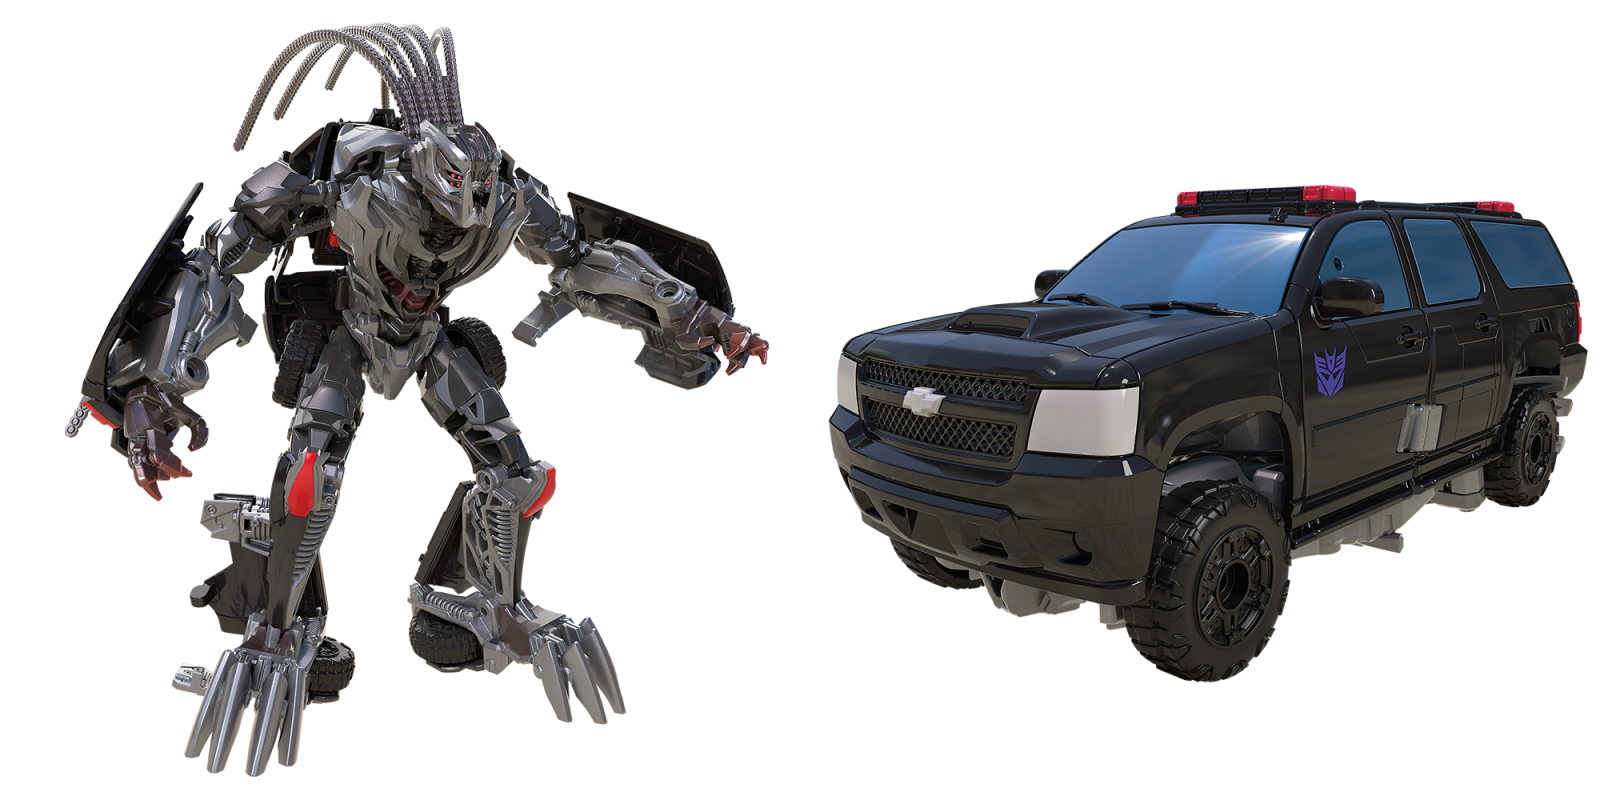 Transformers News: See Now Buy Now: Transformers Studio Series Line Available to Order Now #HasbroToyFair #NYTF